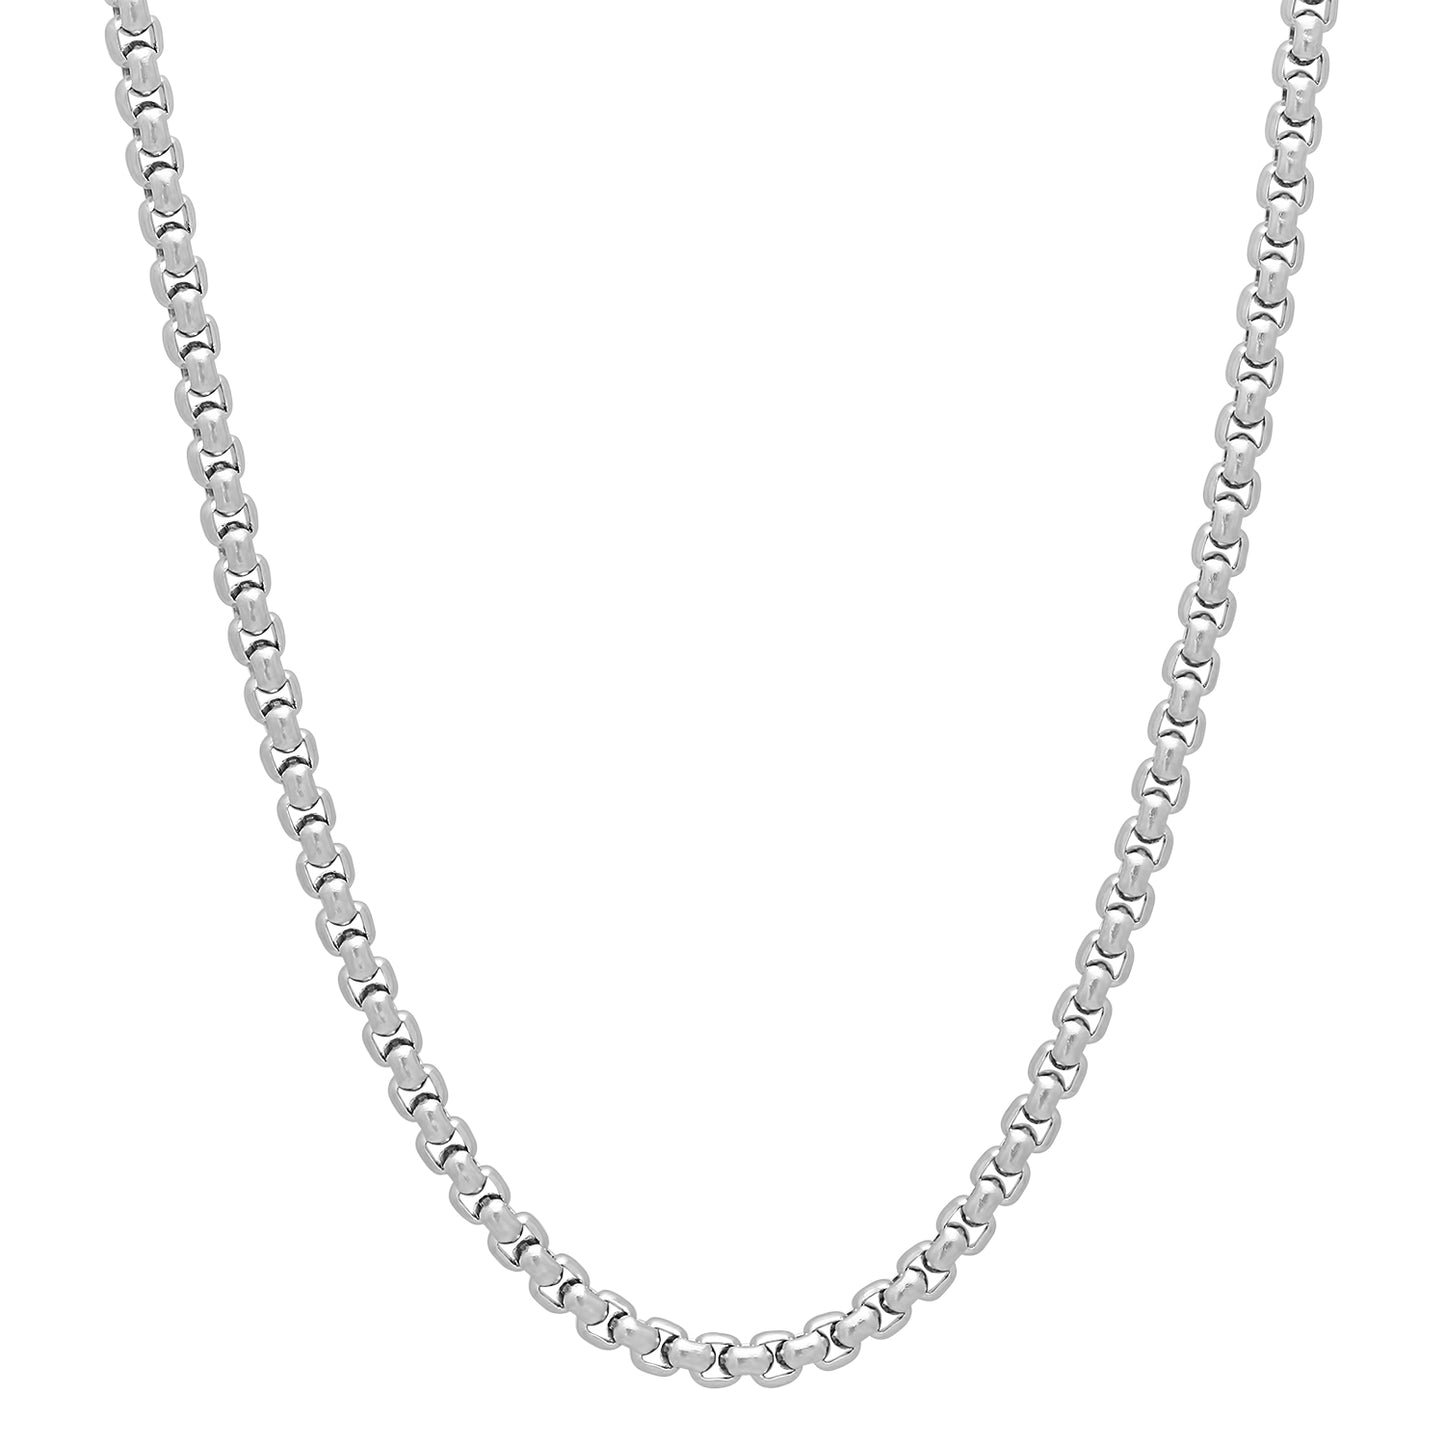 3mm High-Polished Stainless Steel Square Box Chain Necklace, 17'-30' + Jewelry Cloth & Pouch (SKU: ST-NK1003)